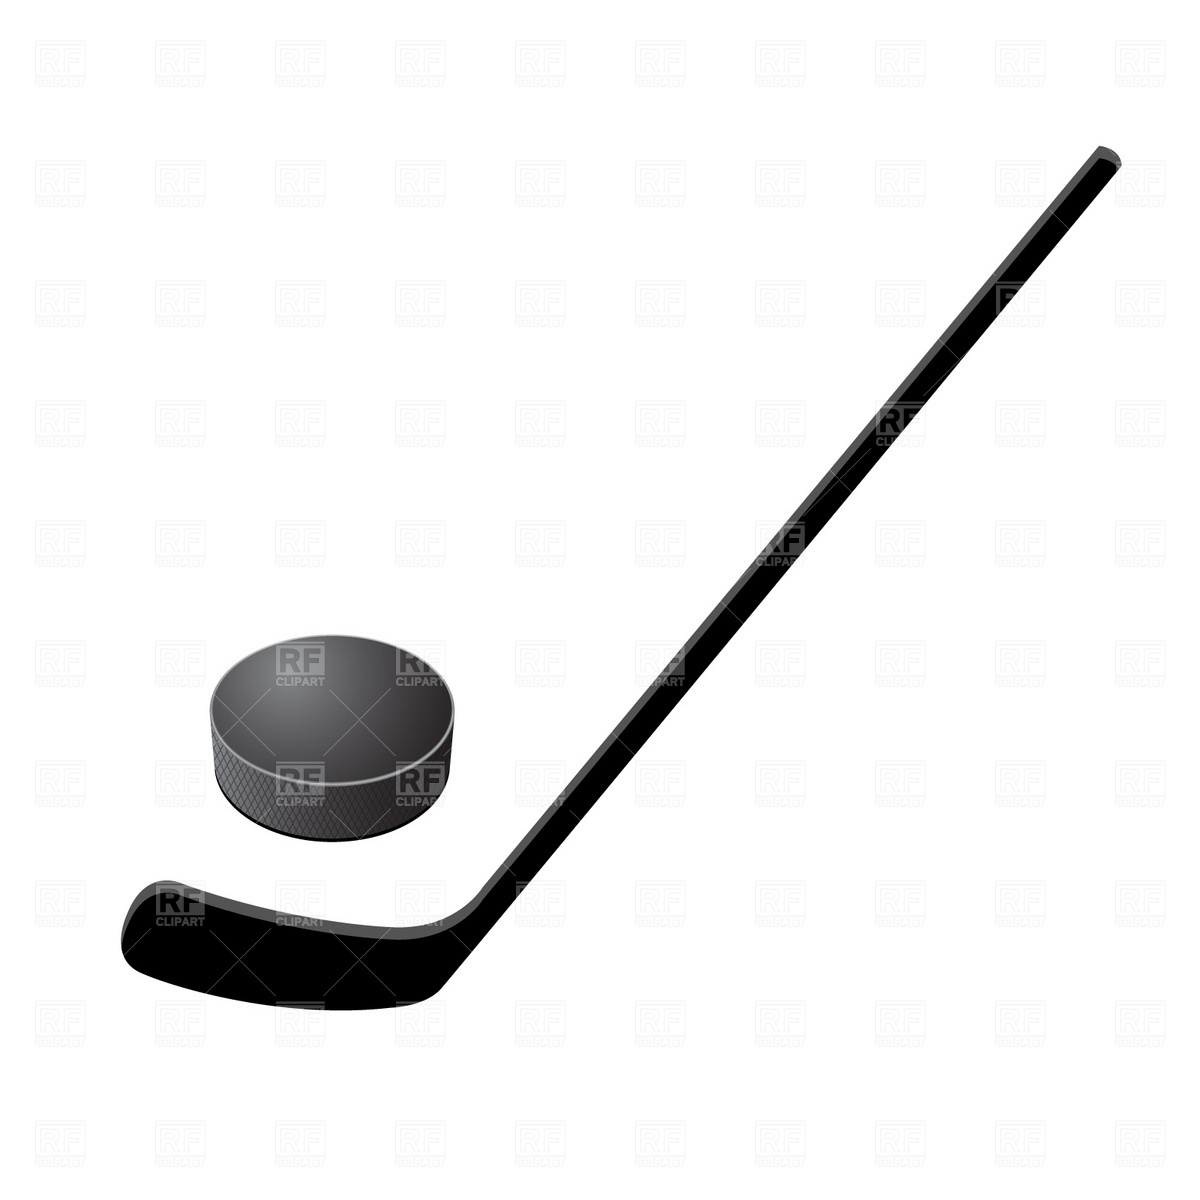 hockey stick and puck vector - Clip Art Library